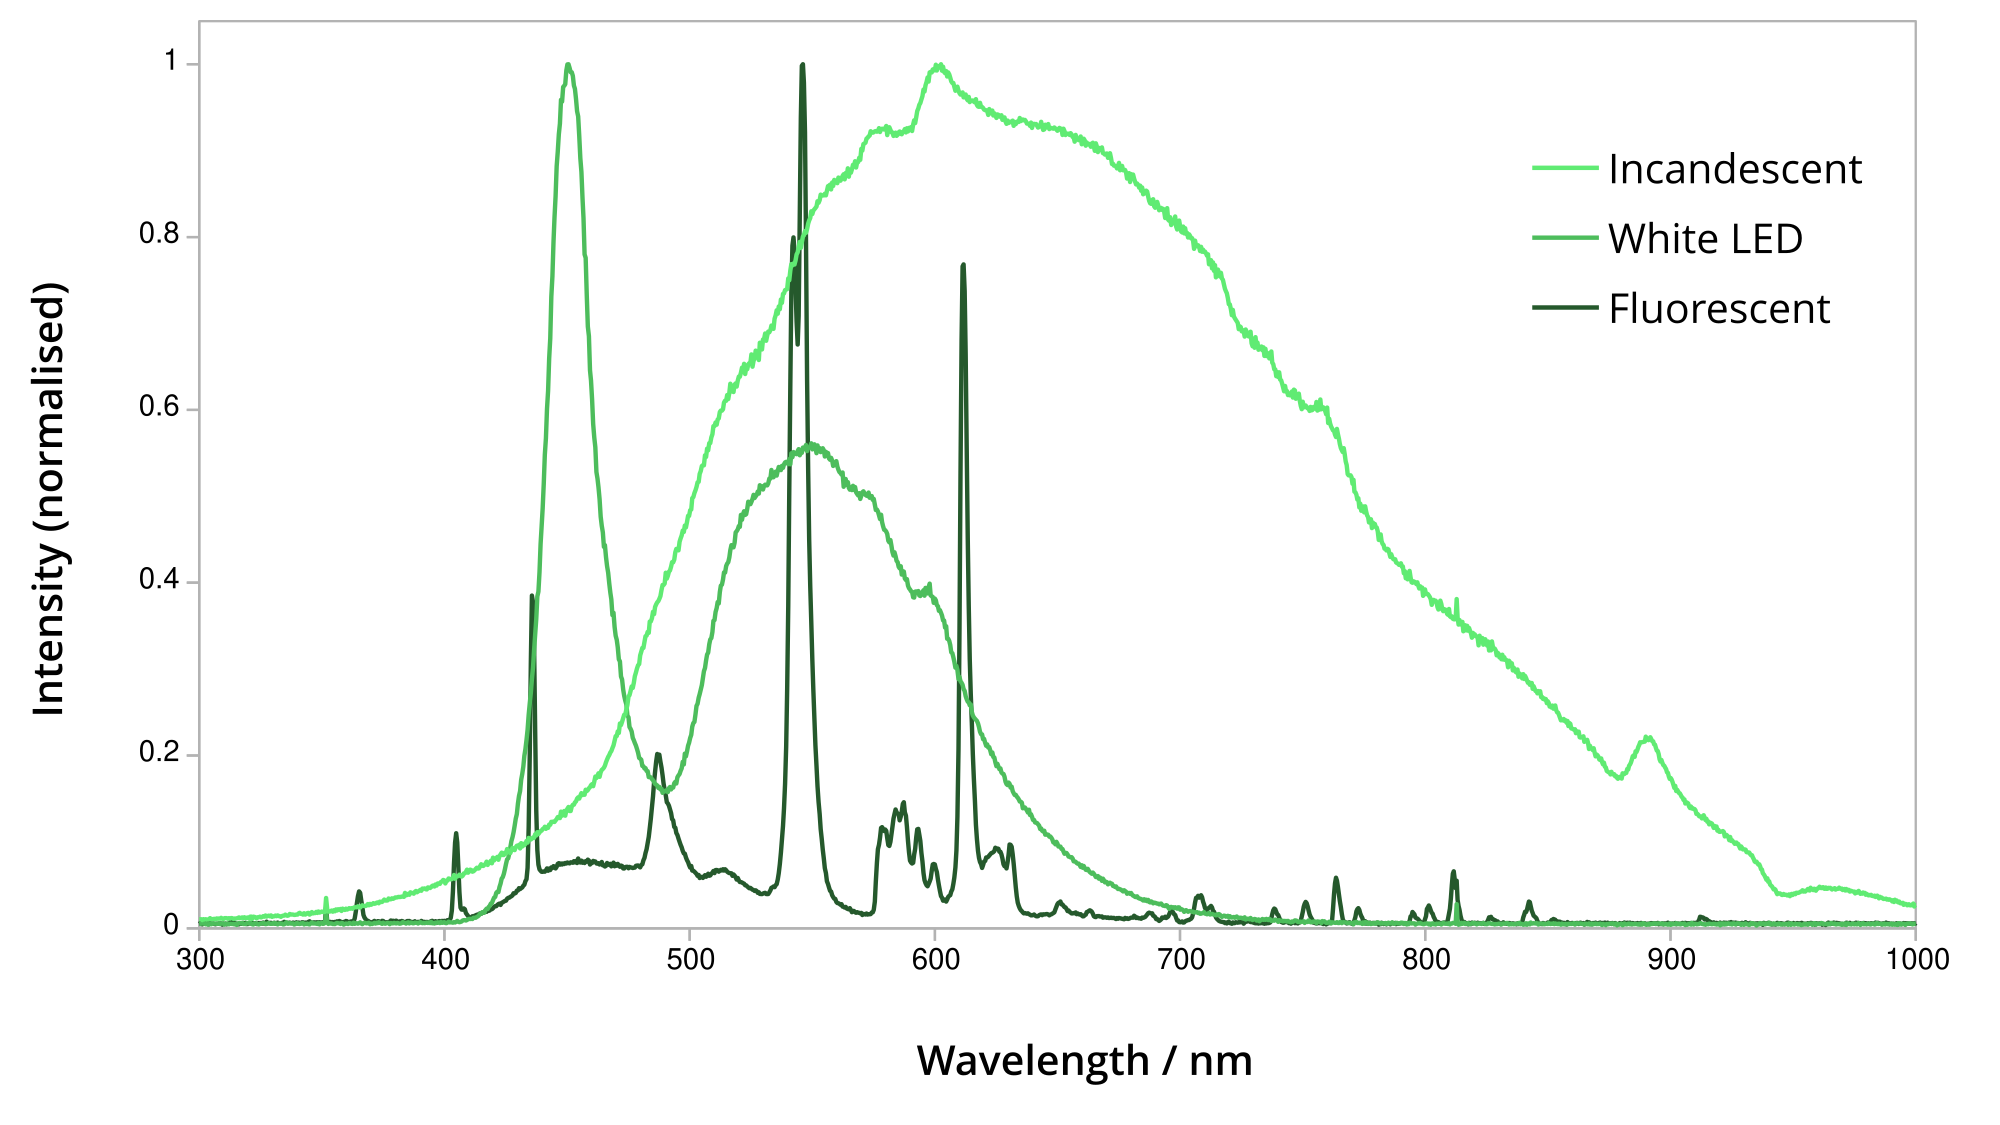 Graph of intensity against wavelength for three light sources